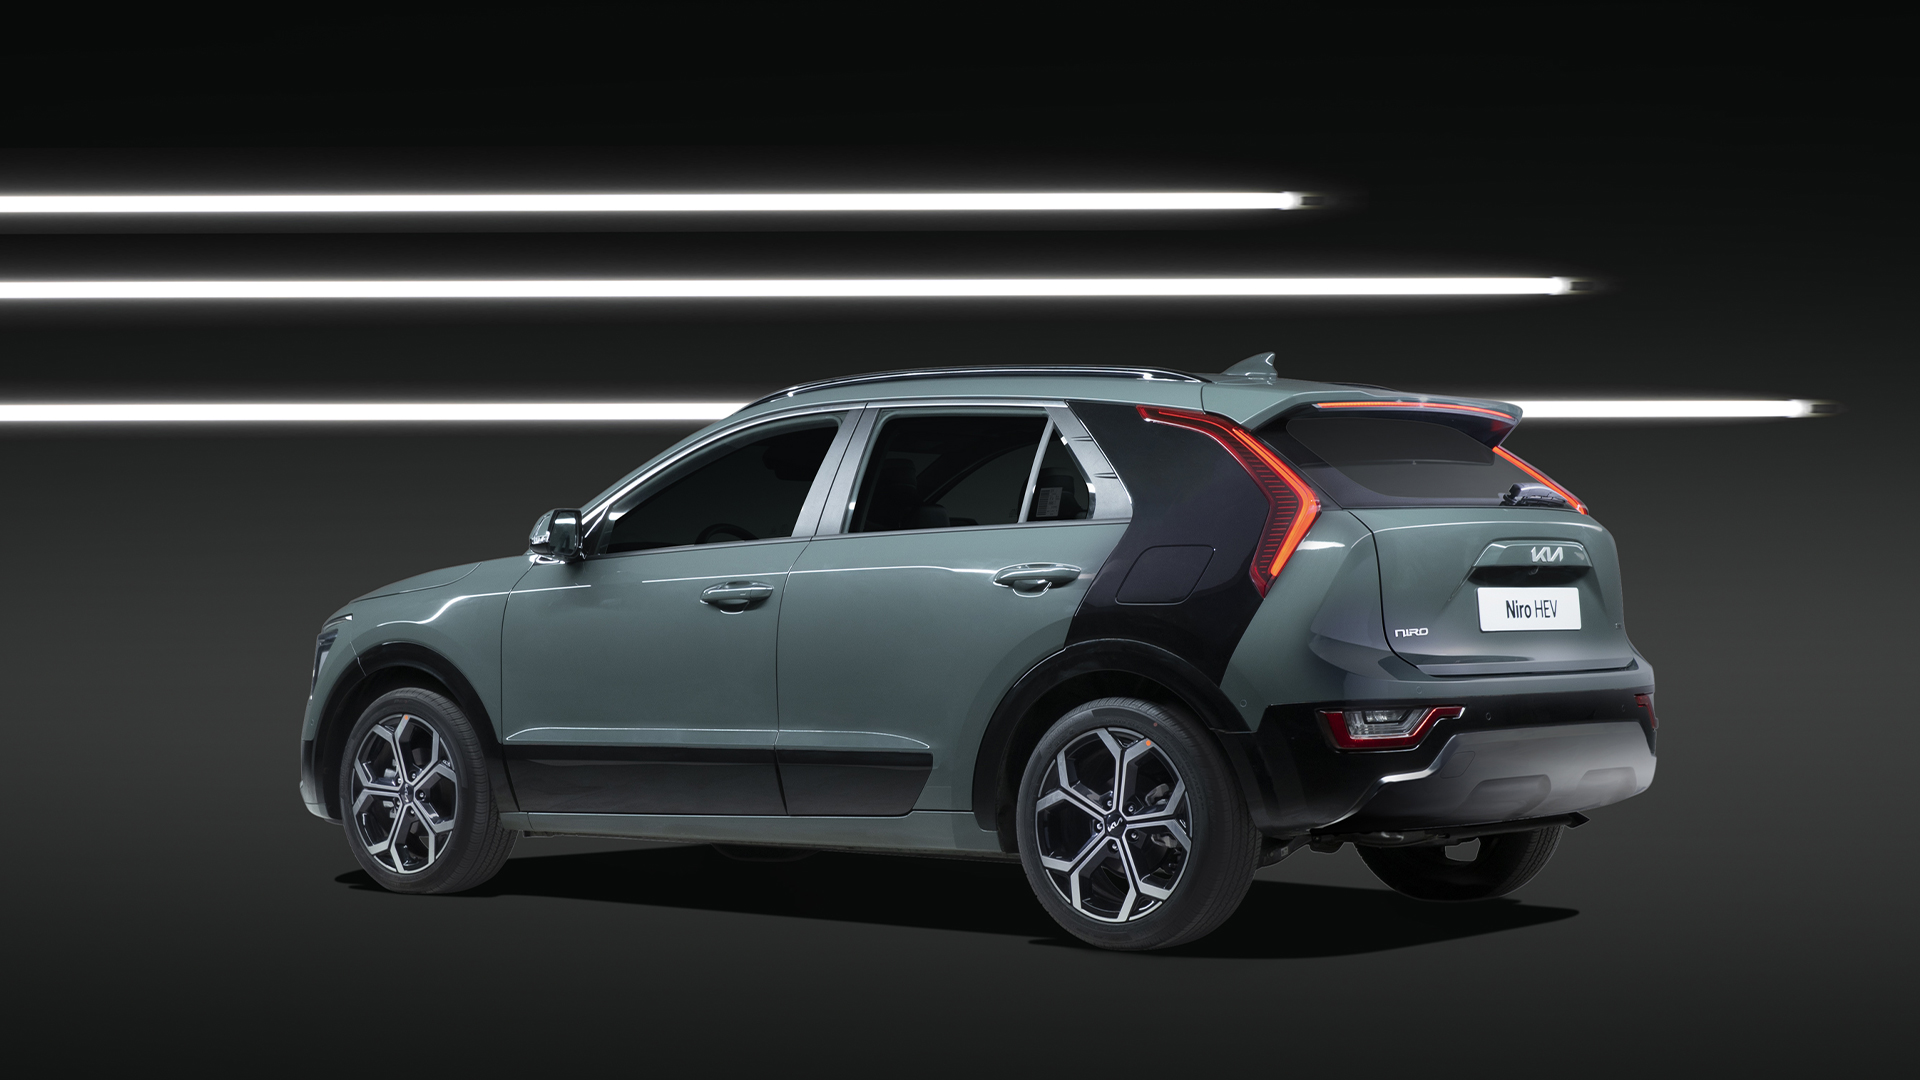 The rear side of the Niro against the backdrop of 3 rows of LED lights in black background